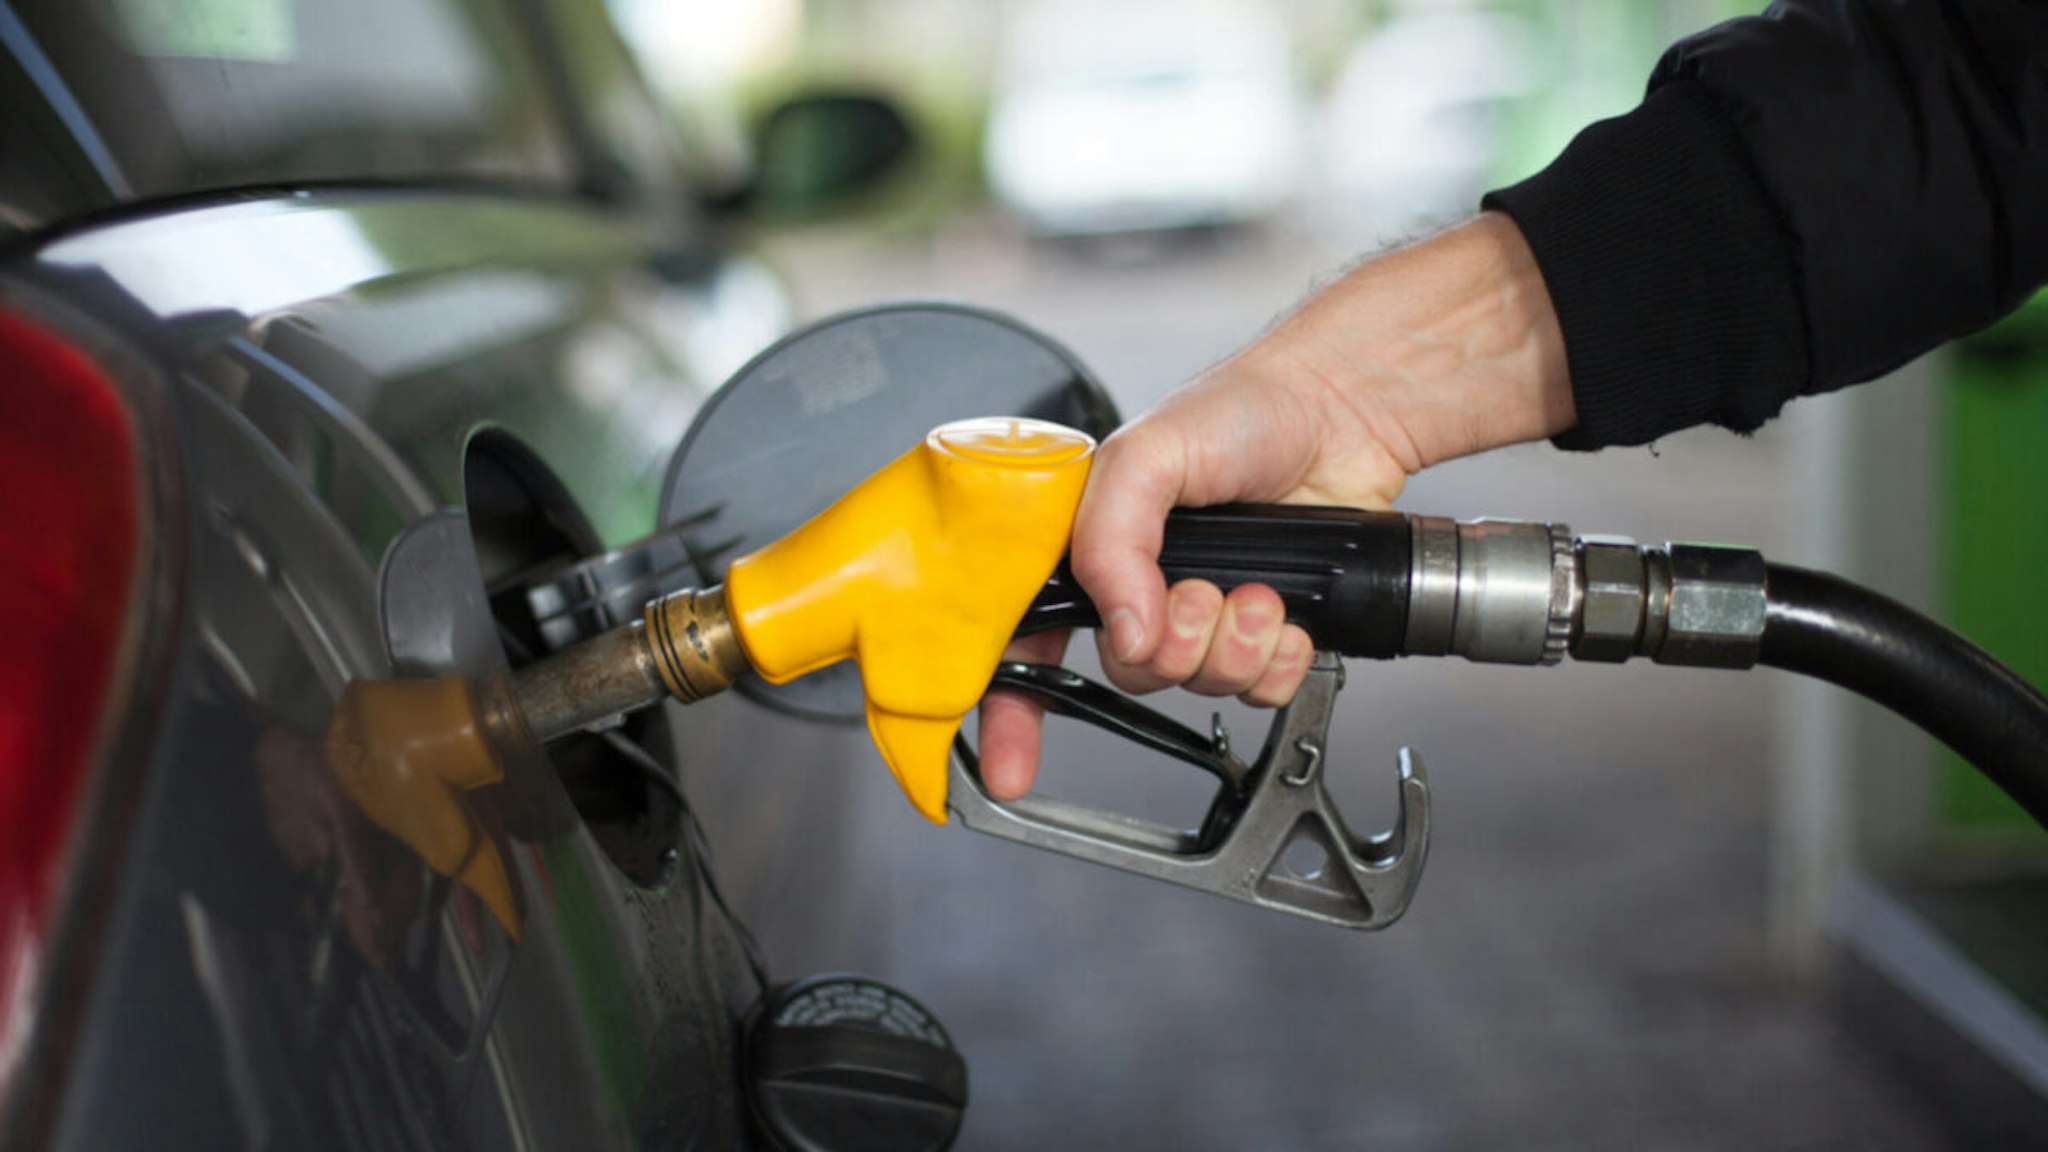 Hand of man fueling up a vehicle with a yellow gas pump.